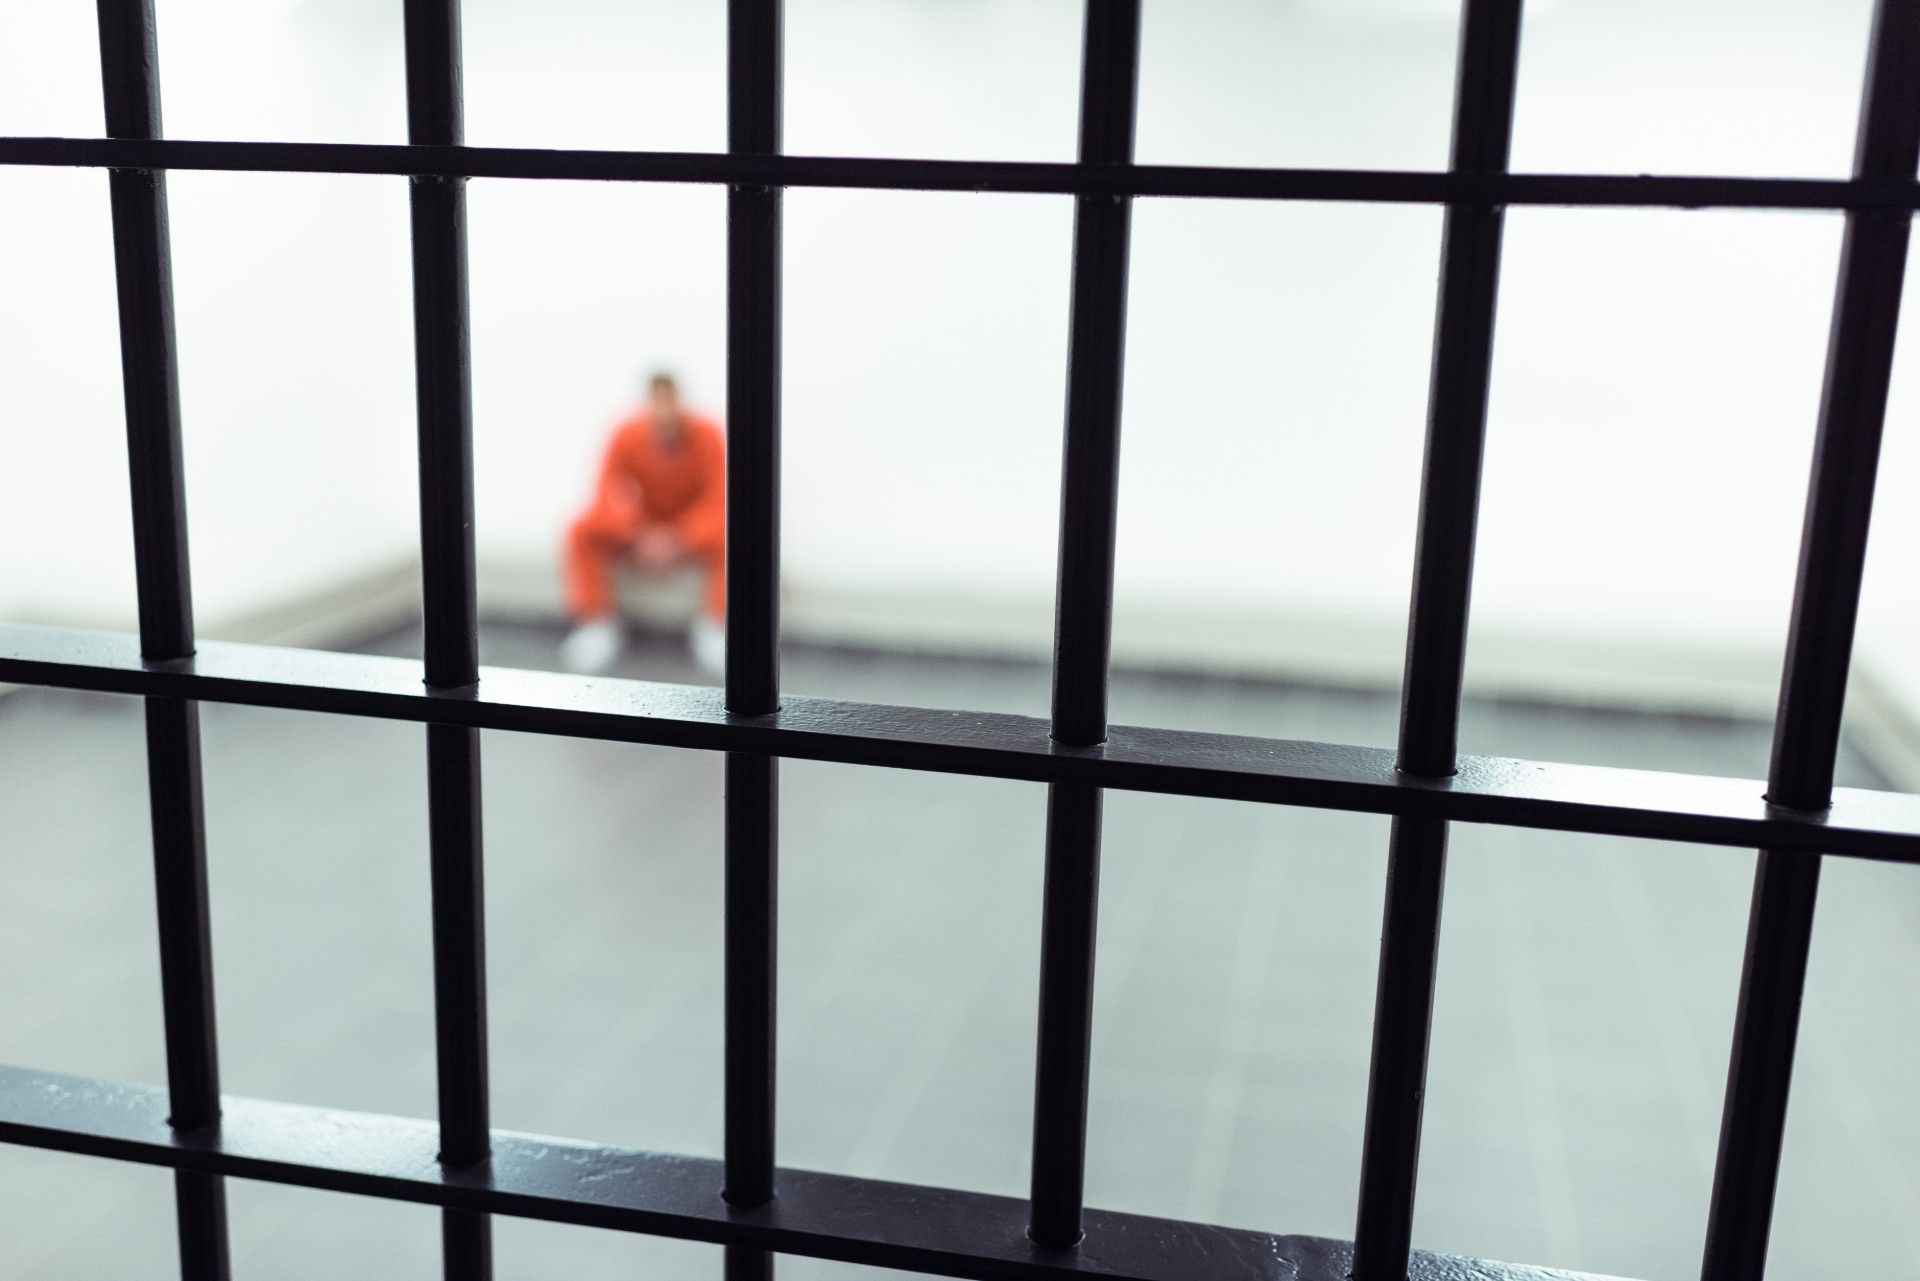 Blurred image of prisoner sitting alone in cell, with bars in foreground - prison visits